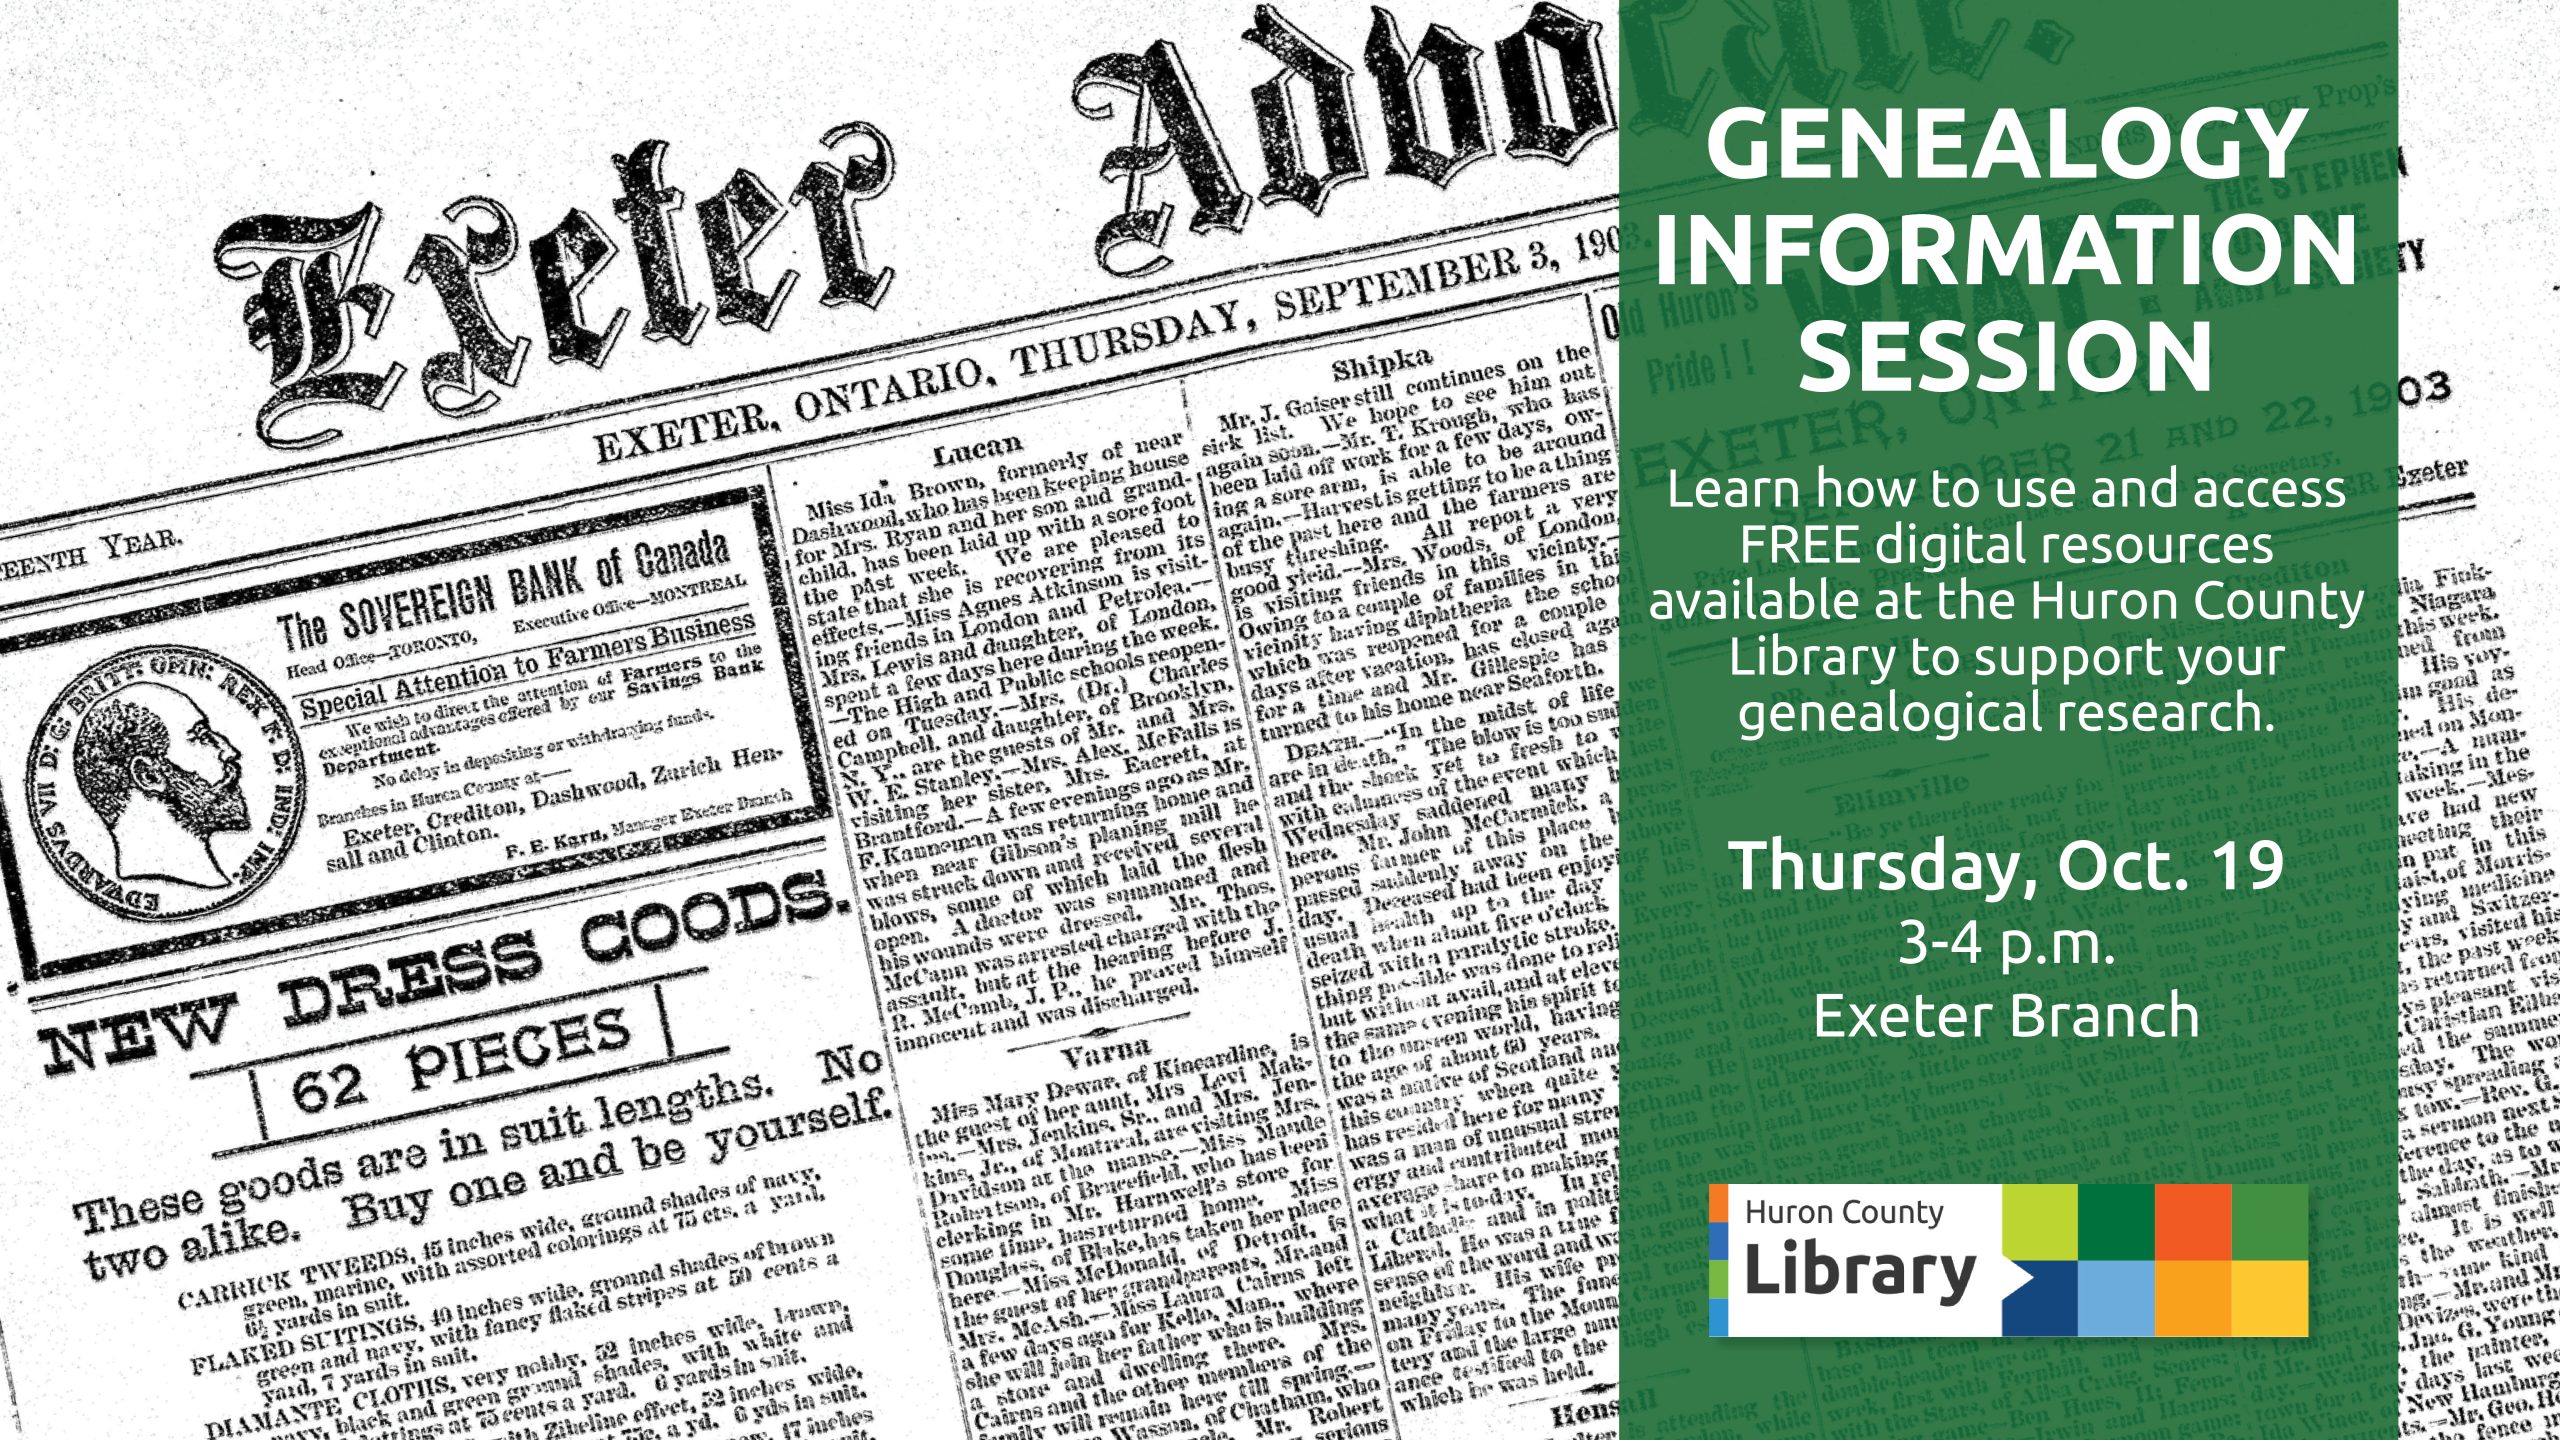 Image of the front cover of the Exeter Advocate, 1903. with text promoting genealogy info session at Exeter branch